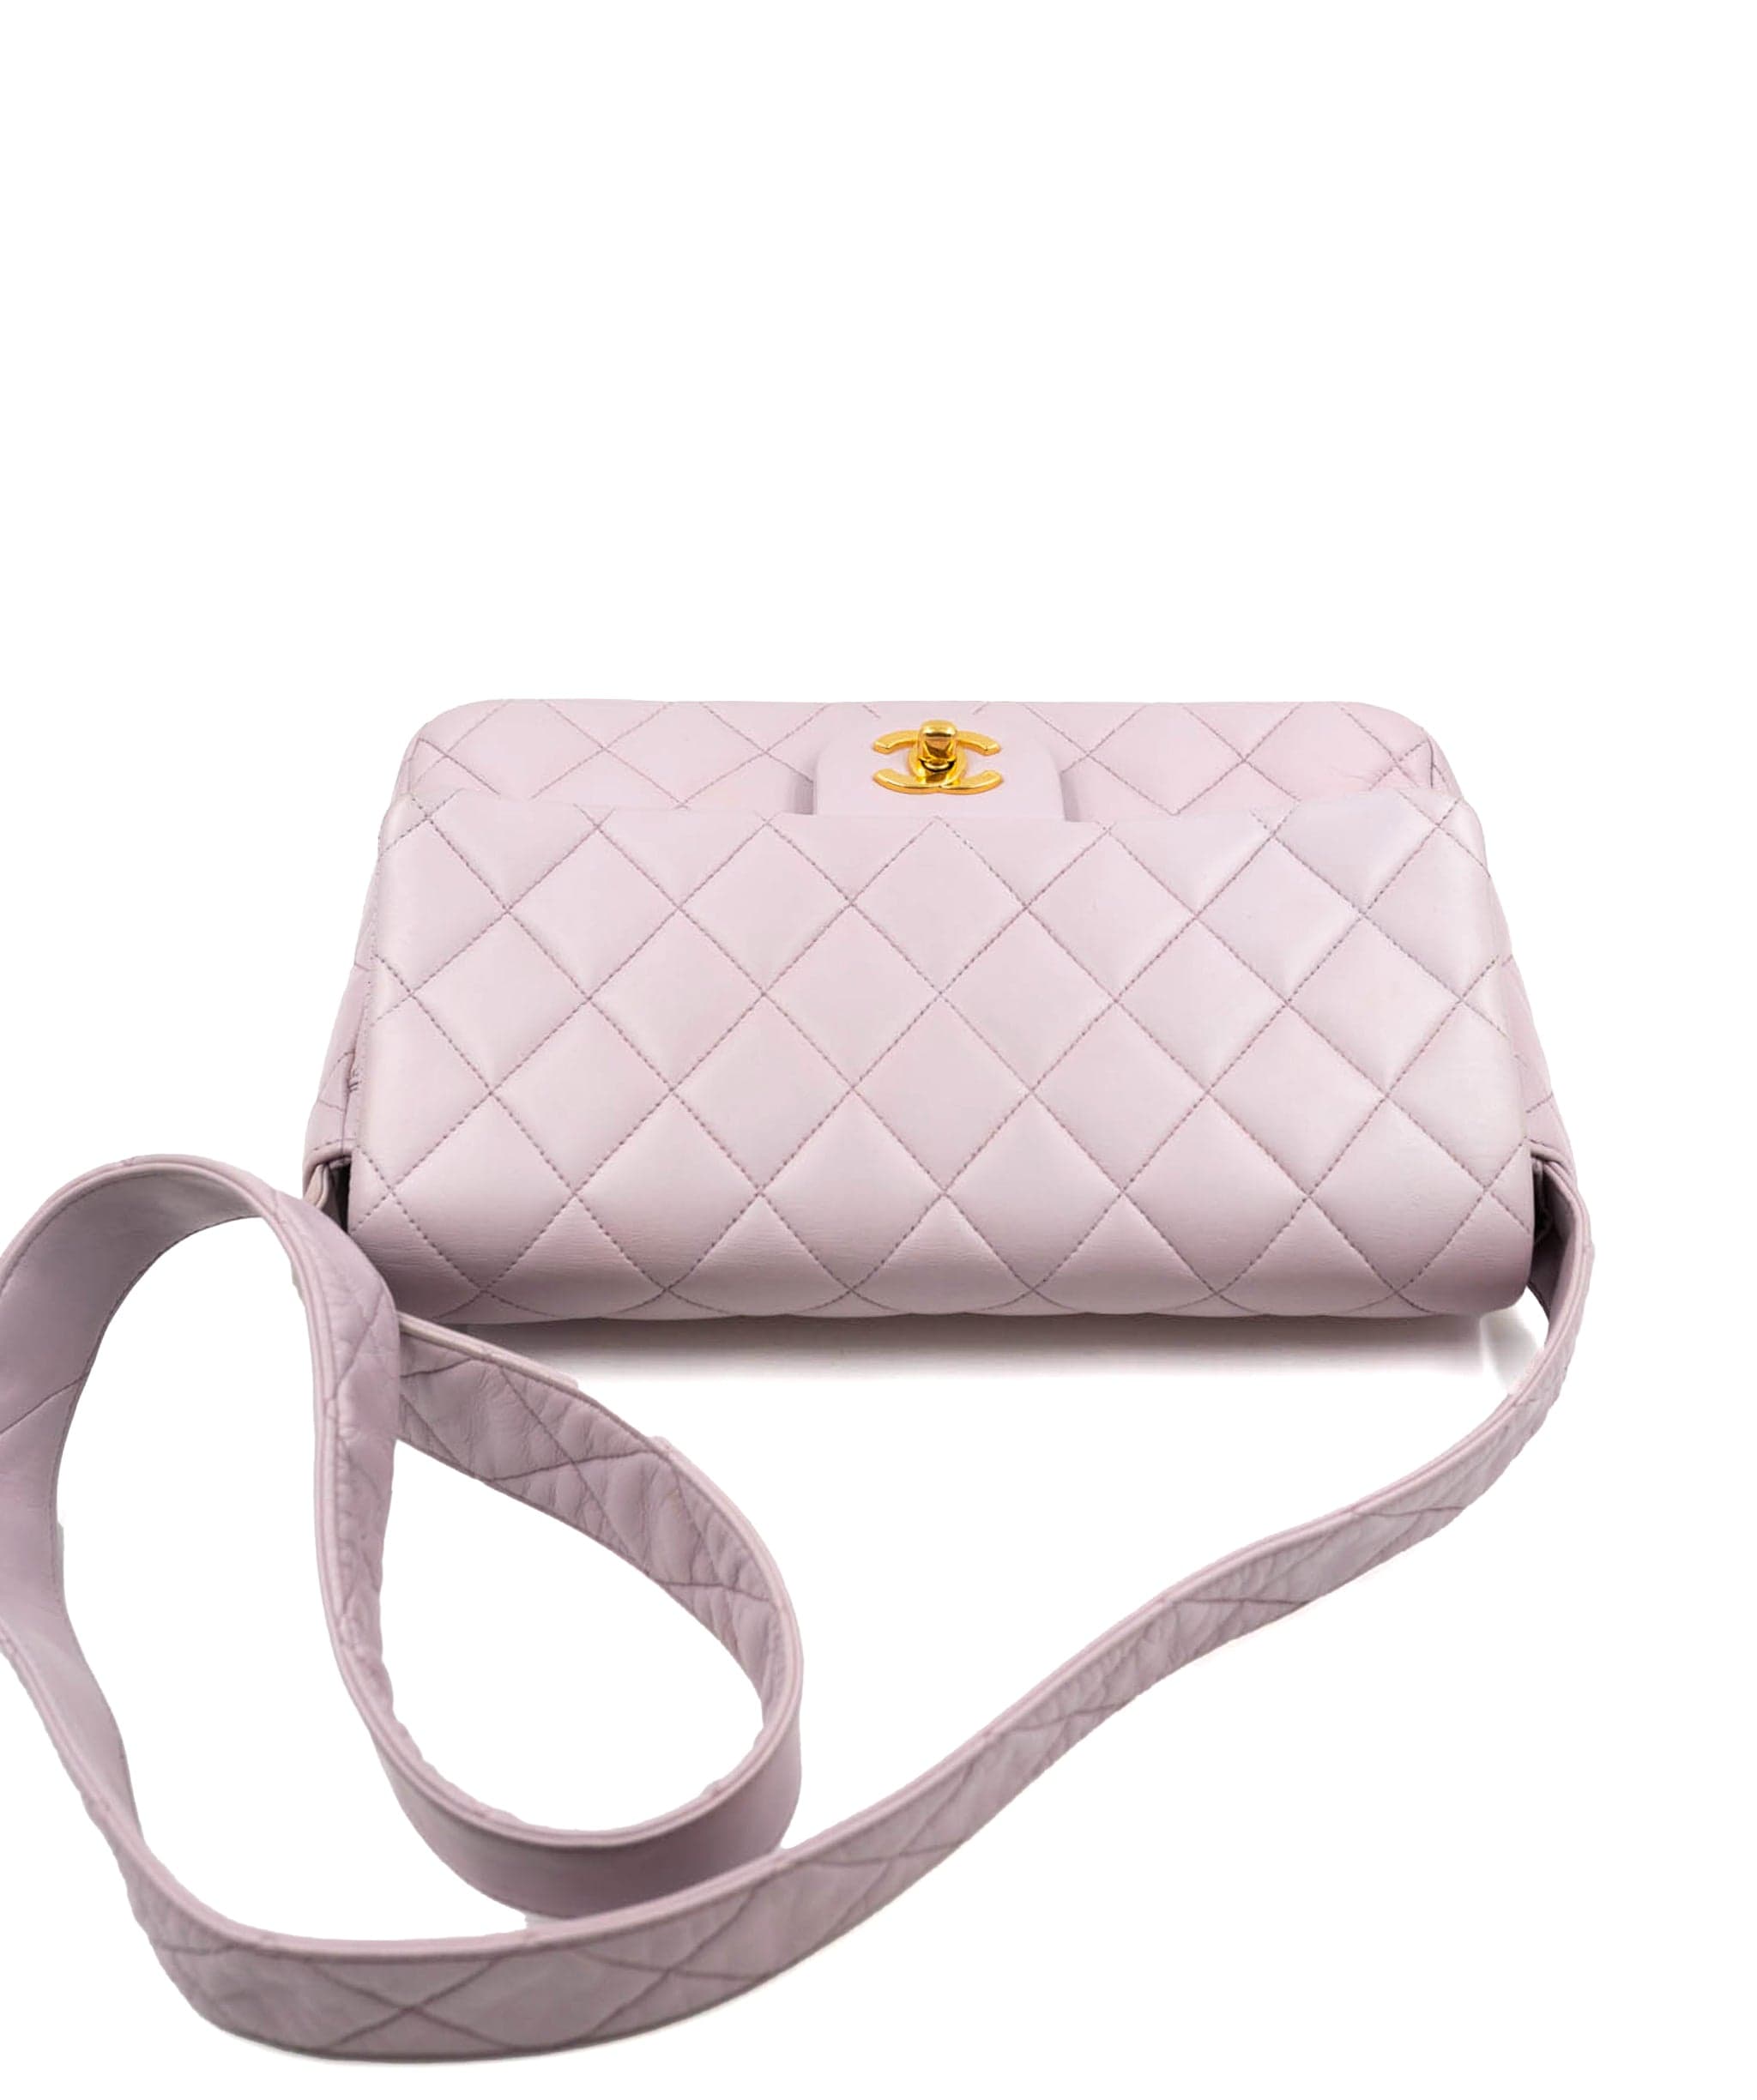 Chanel Chanel Lavender Classic Quilted Flap Bag with Leather Strap ASL2481